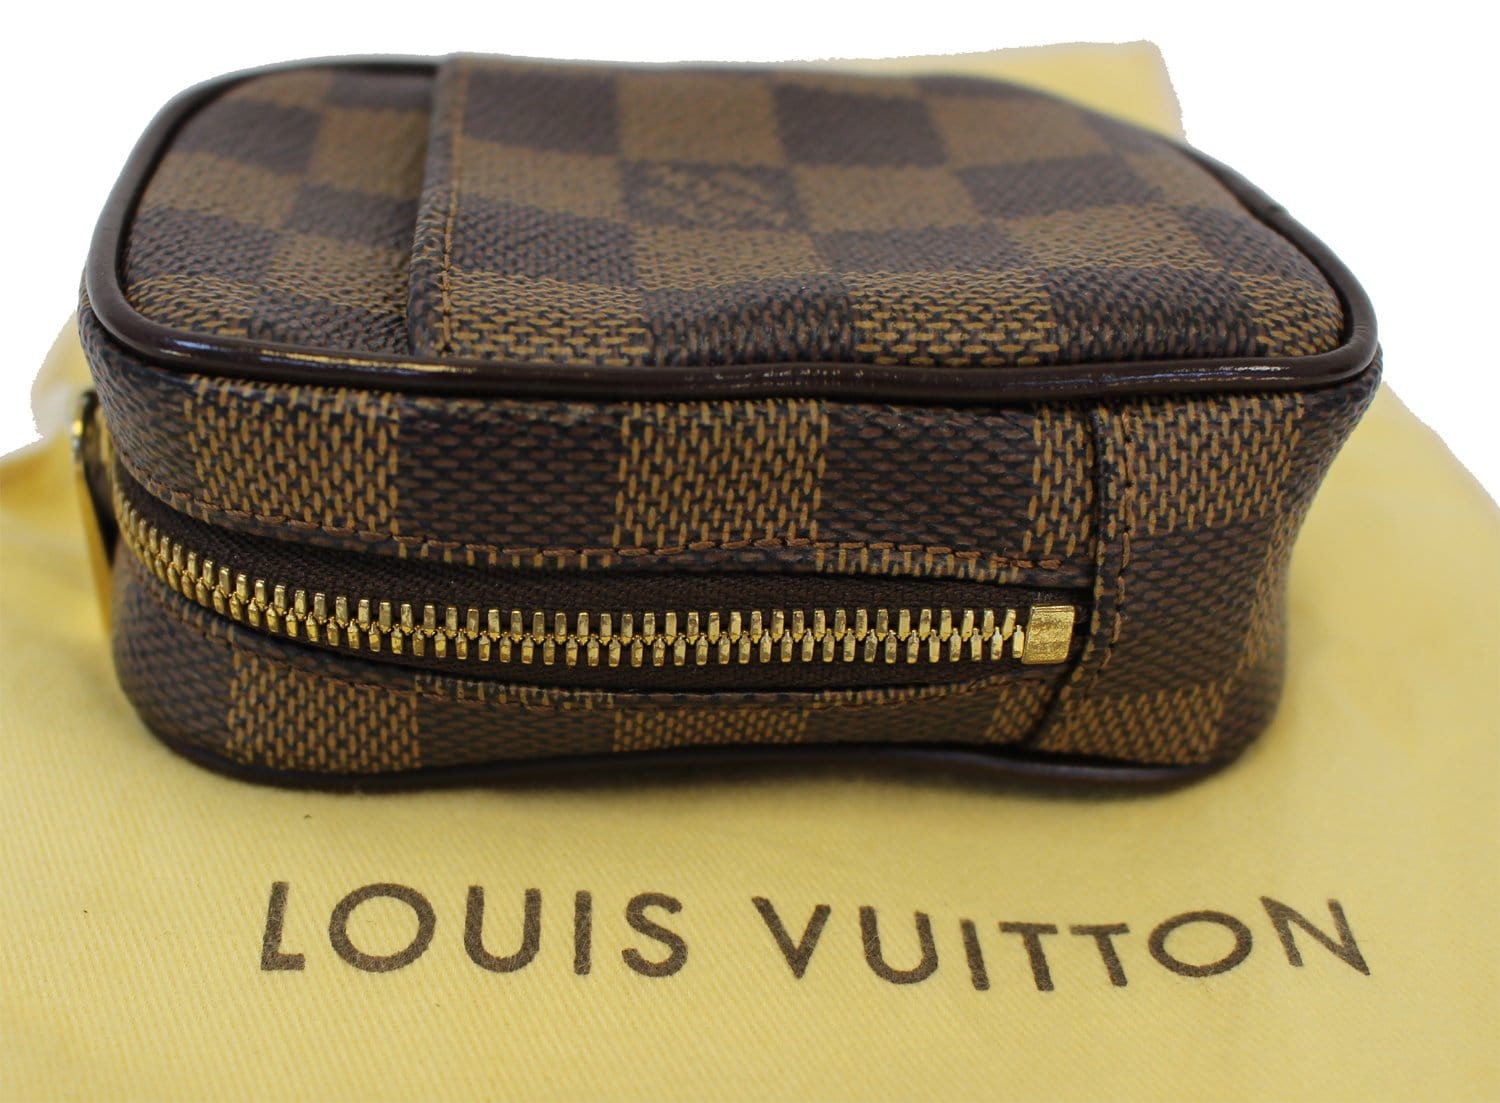 What Goes Around Comes Around Louis Vuitton Damier Zip Tote